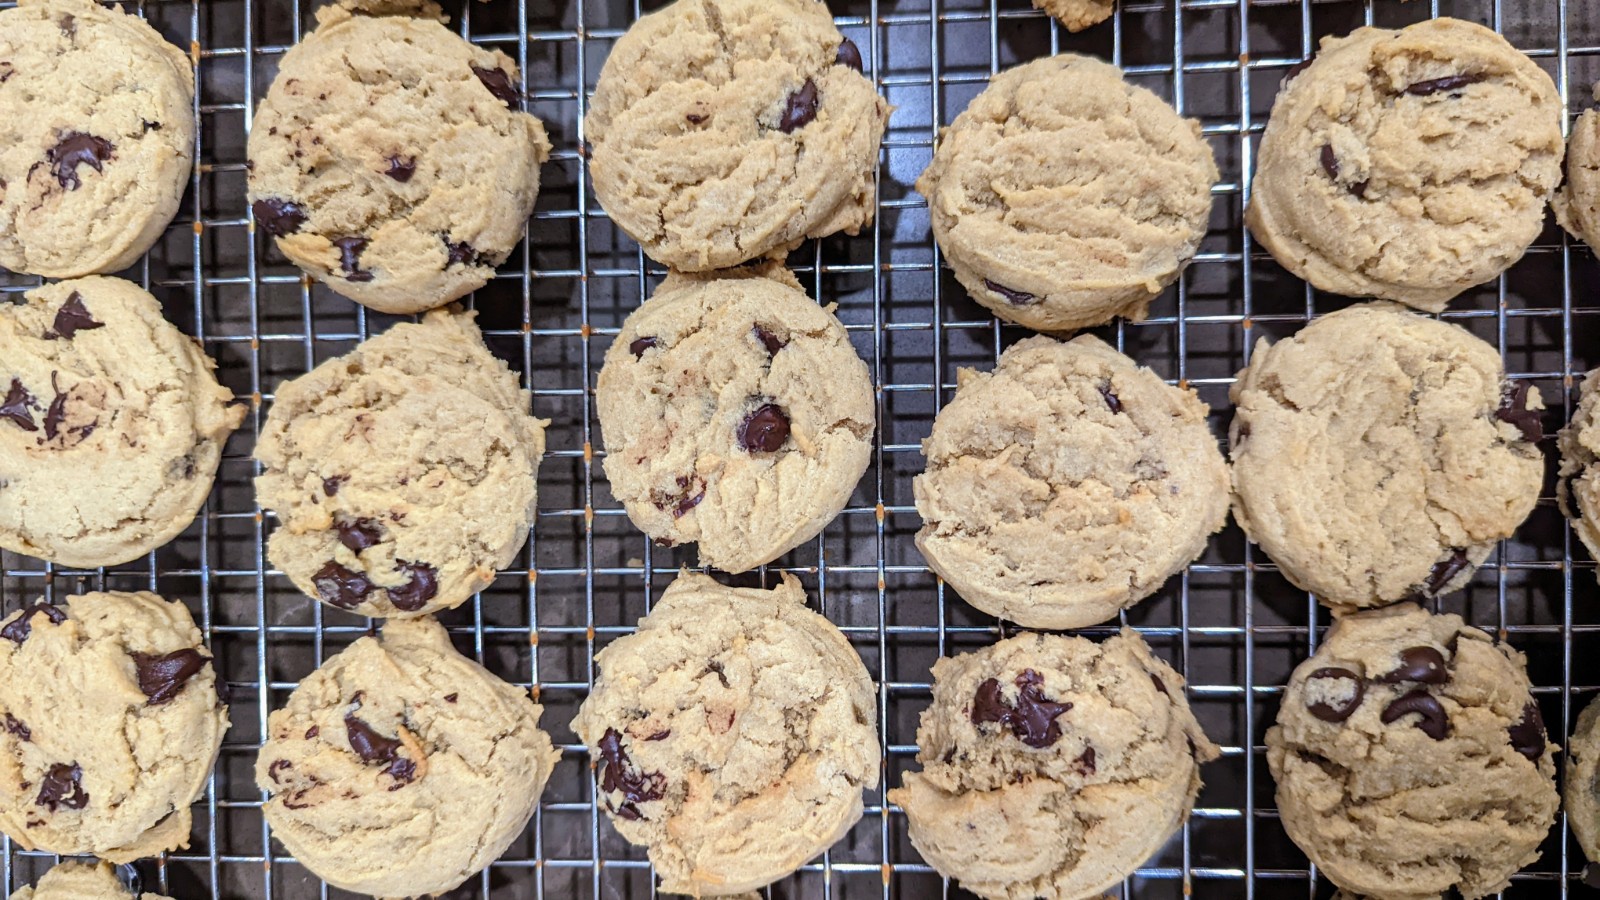 Image of Gluten Free Banana Nut Butter Chocolate Chip Cookies